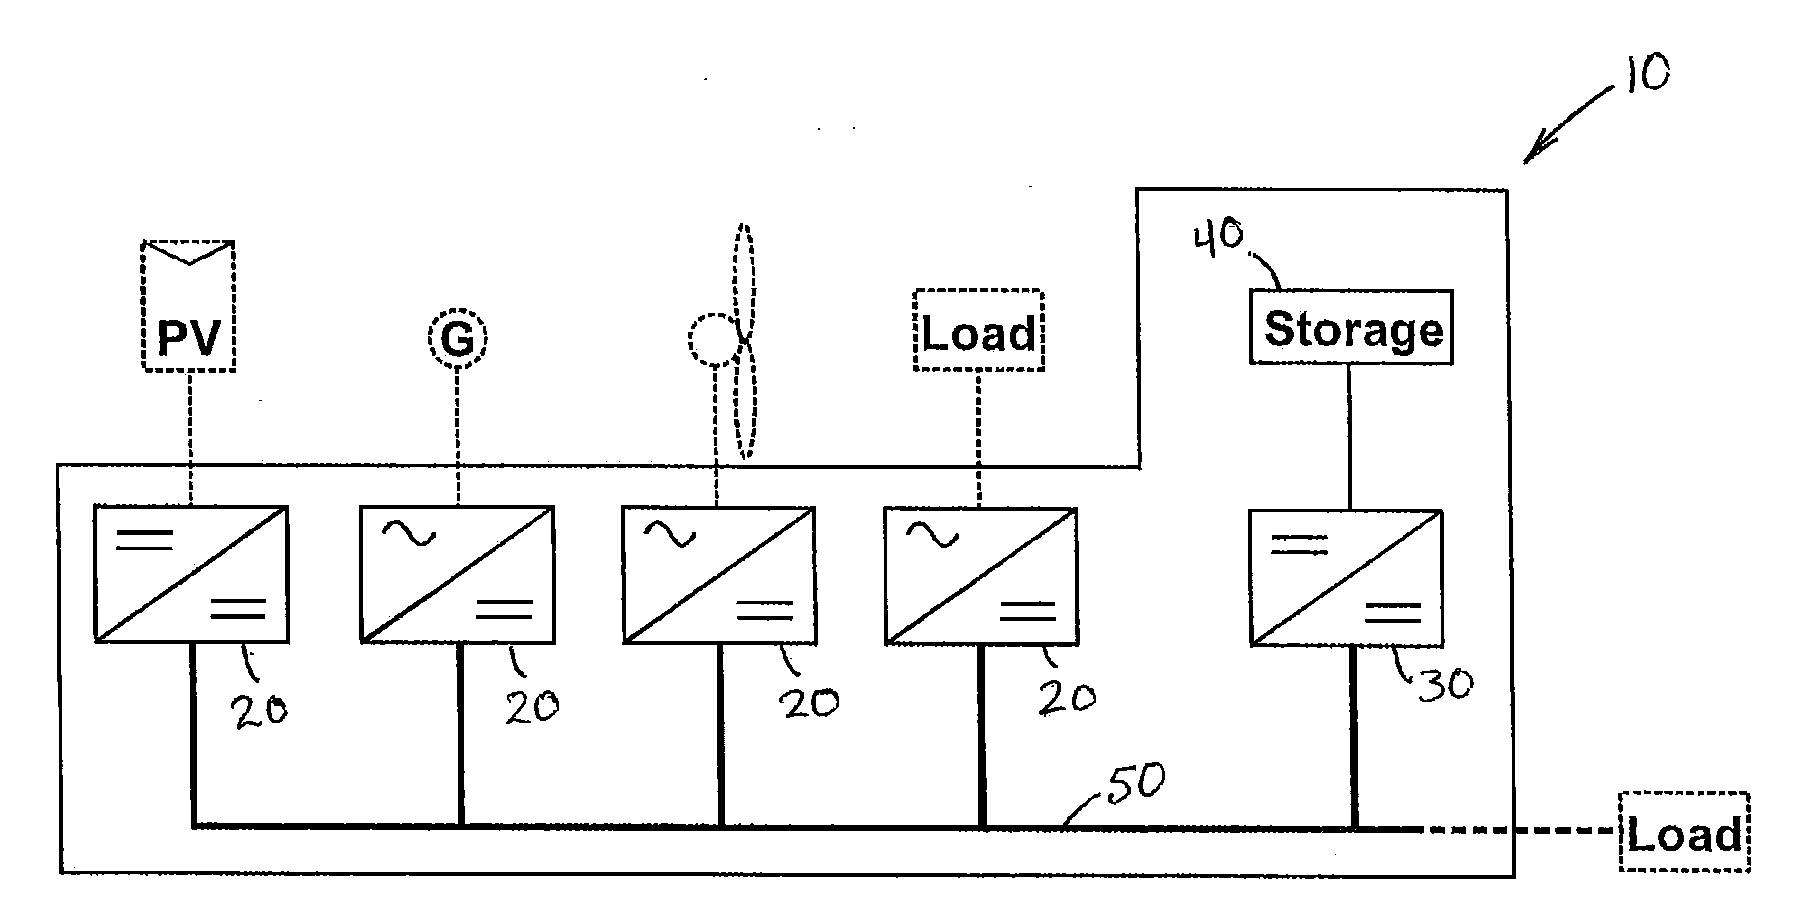 Method and Apparatus for Controlling a Hybrid Power System